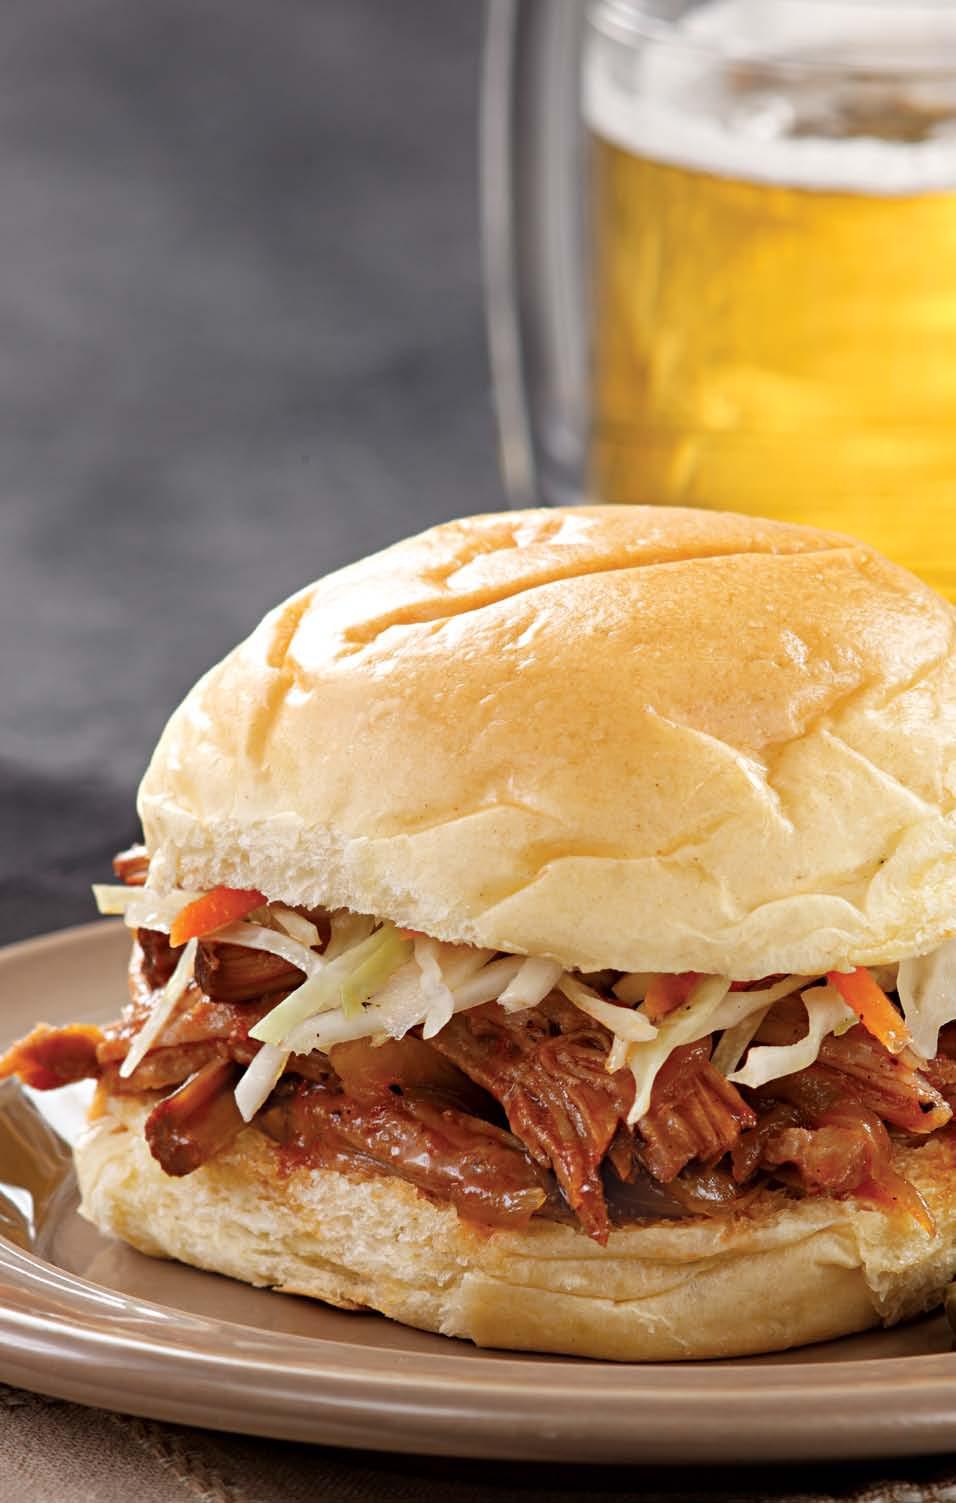 Pulled Pork with Caramelized Onions Makes: 8 servings, about 1 cup each Active time: 1 hour Slow-cooker time: 5-9 hours To make ahead: Prepare through Step 1, cover and refrigerate for up to 2 days.